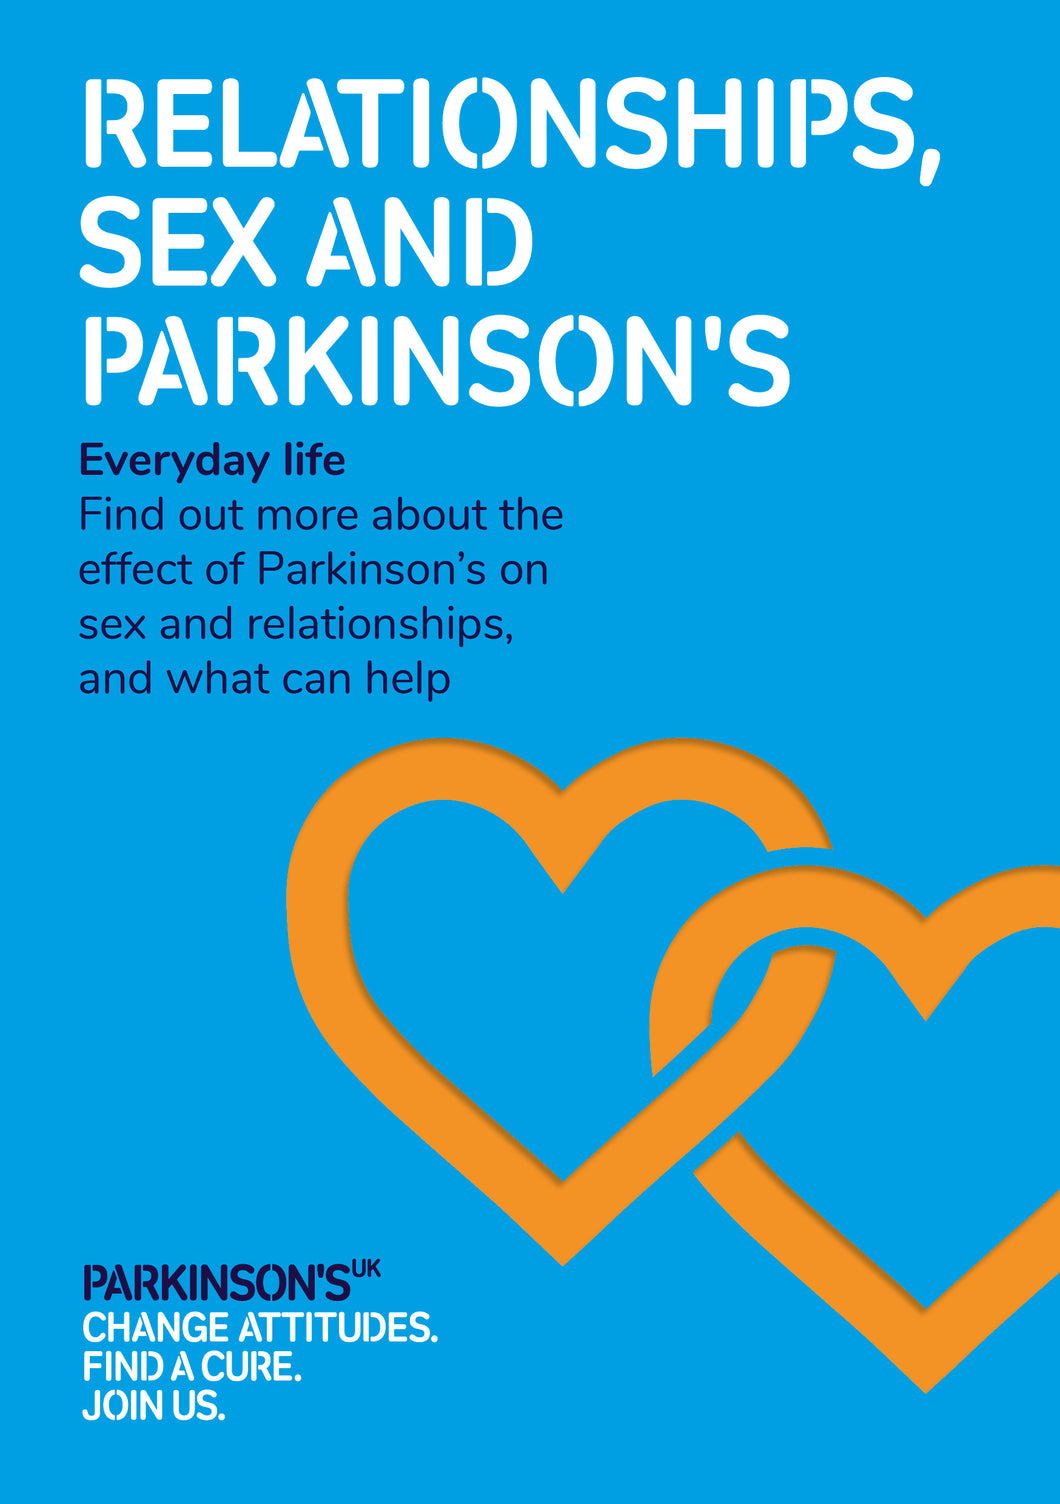 Relationships, sex and Parkinson's